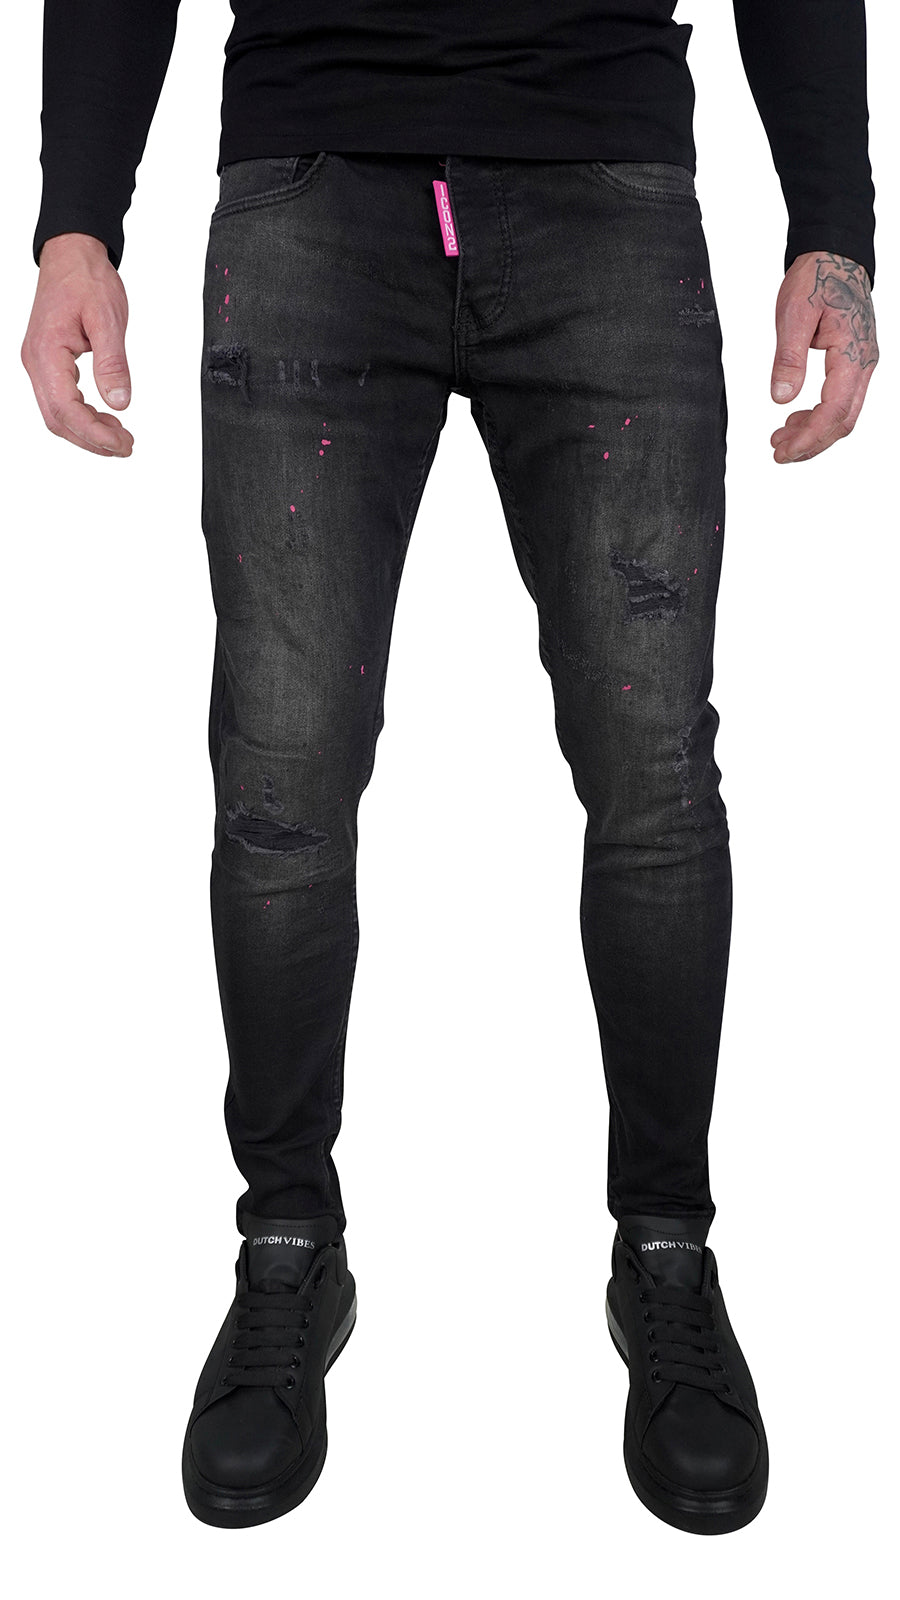 THE ICON PINK SPATTED JEANS - DARK GREY